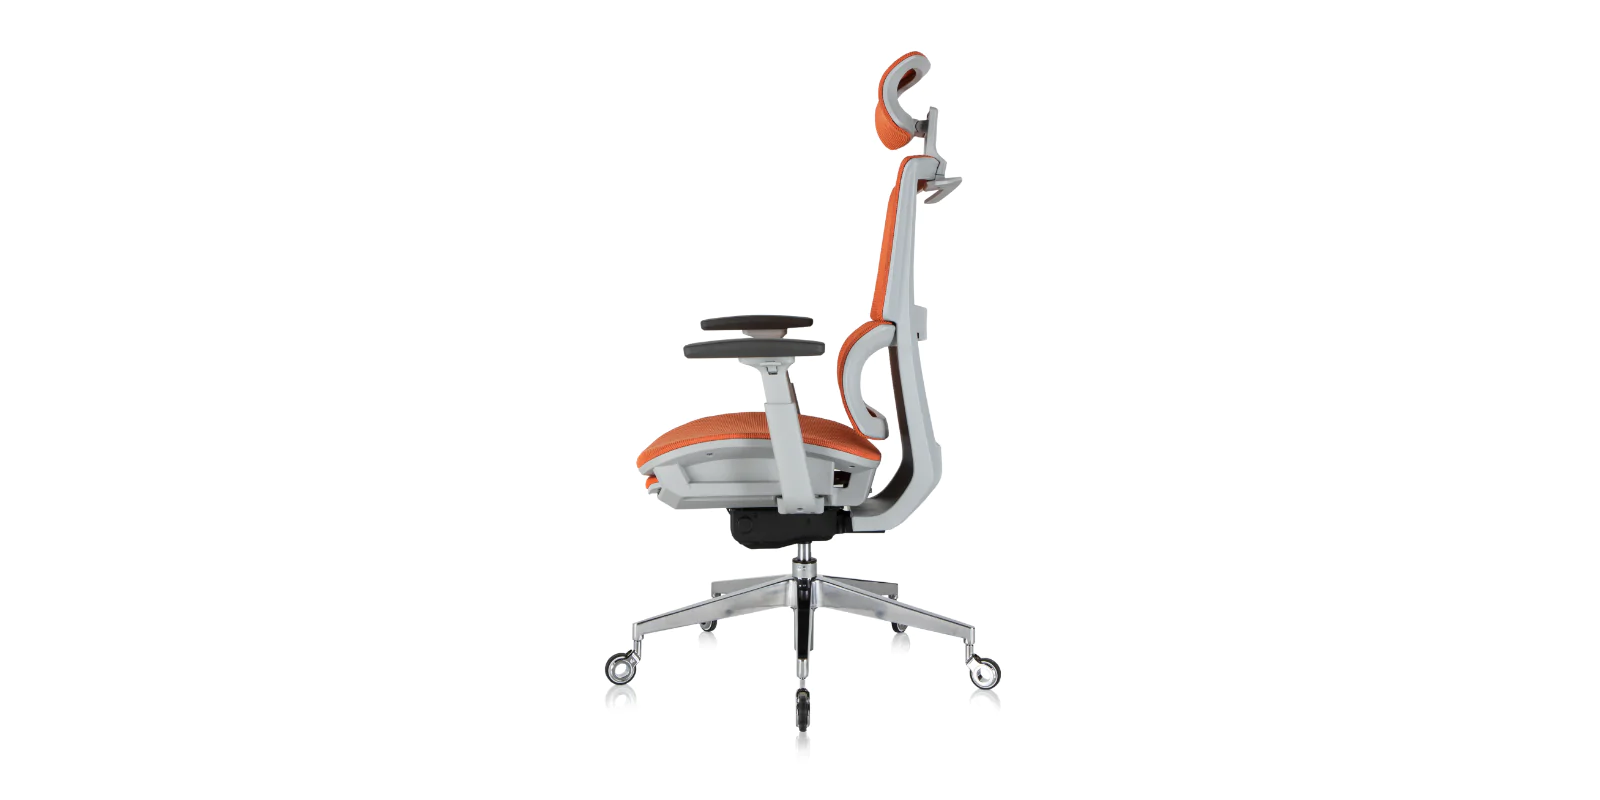 What's the best office chair for posture